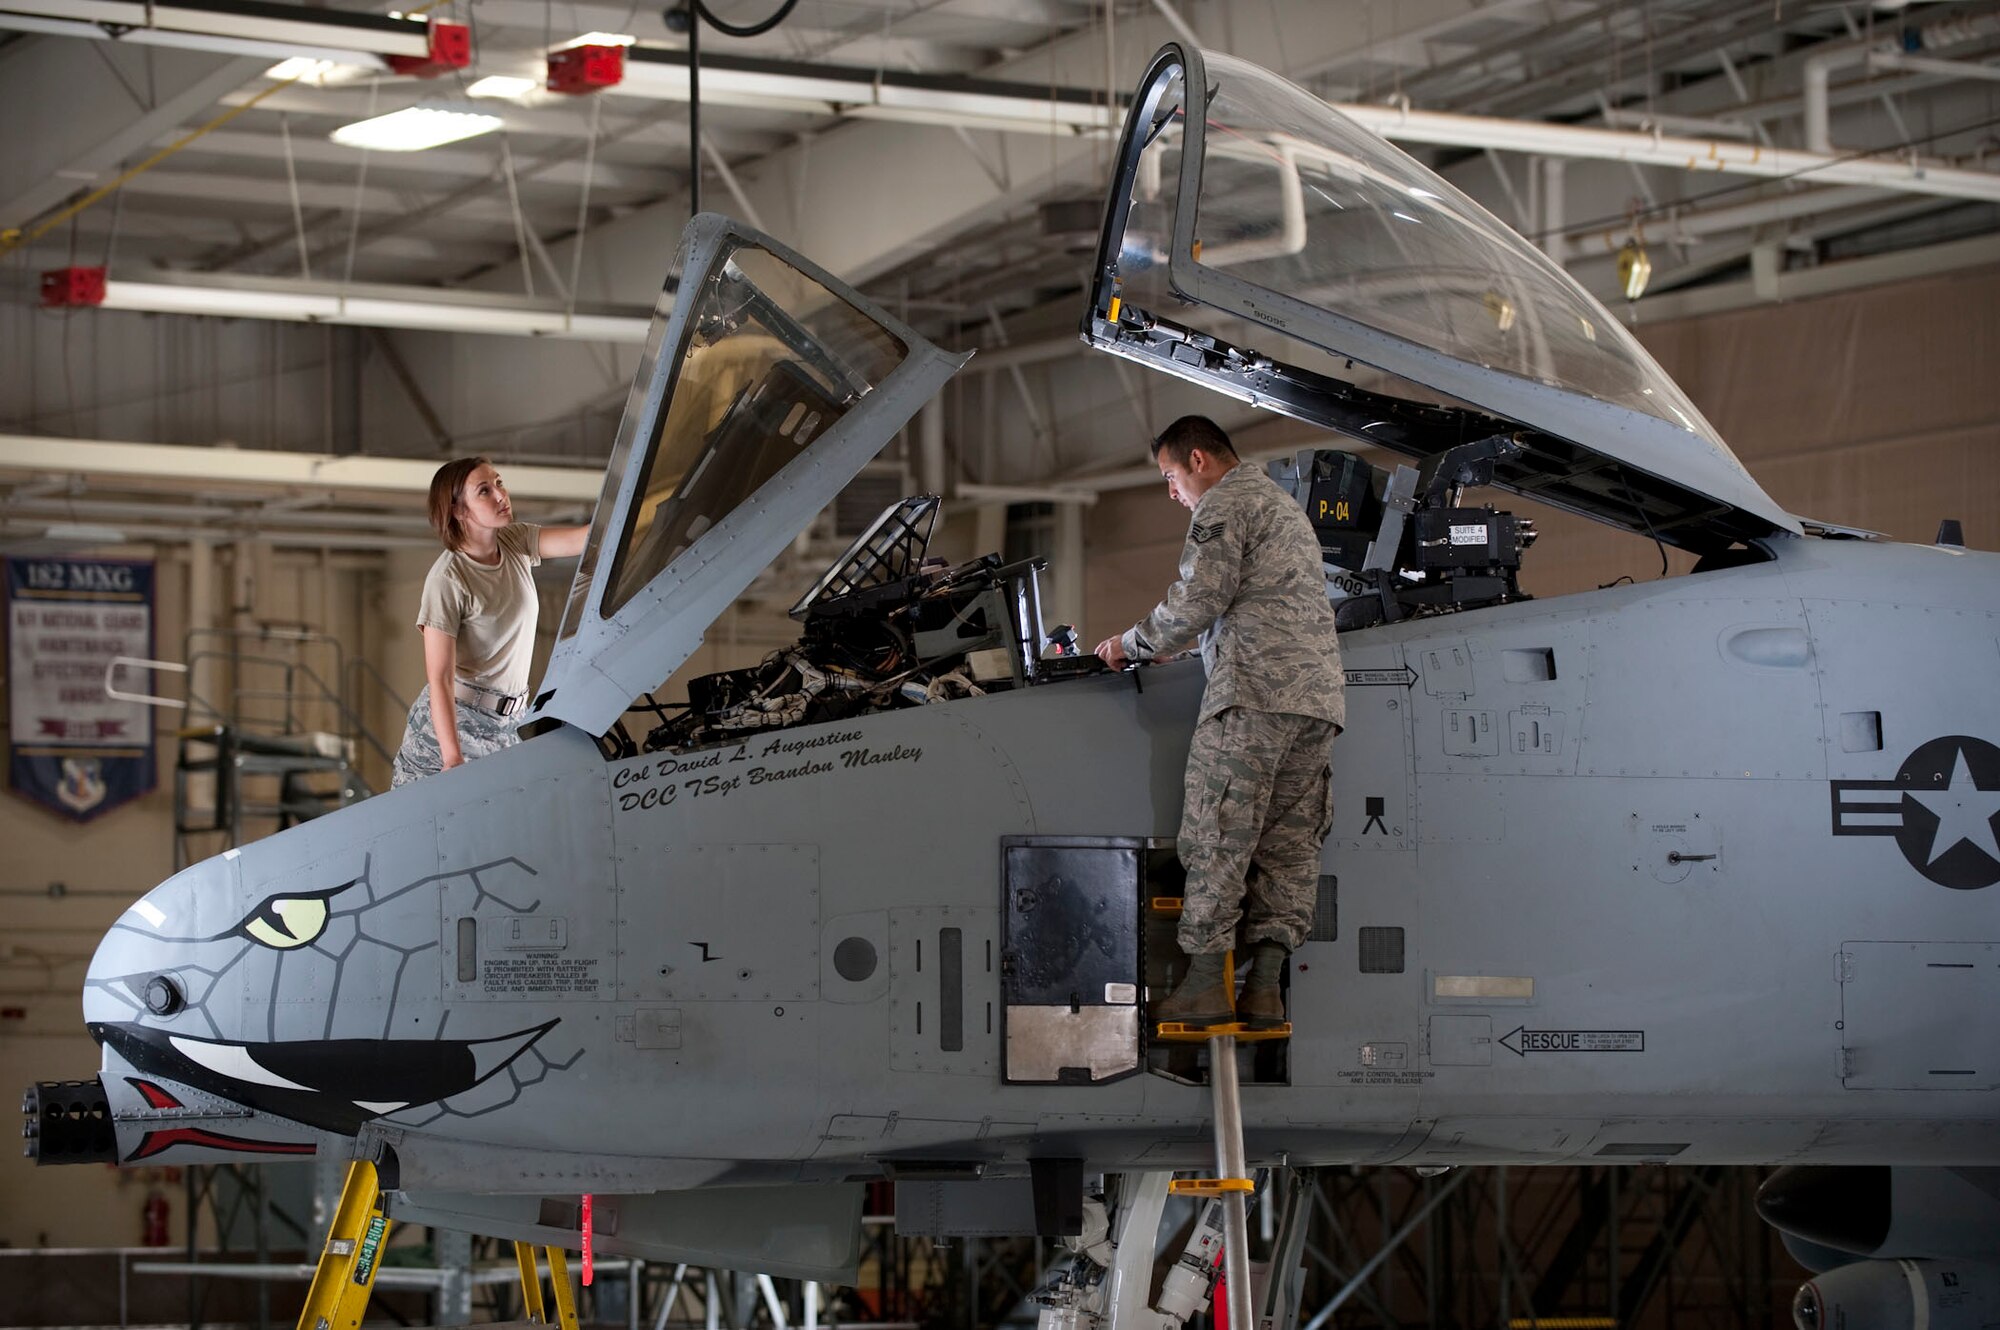 Two airmen simulate performing checks on an A-10 aircraft during an Air National Guard commercial shoot September 28, 2012 in Peoria, Ill.